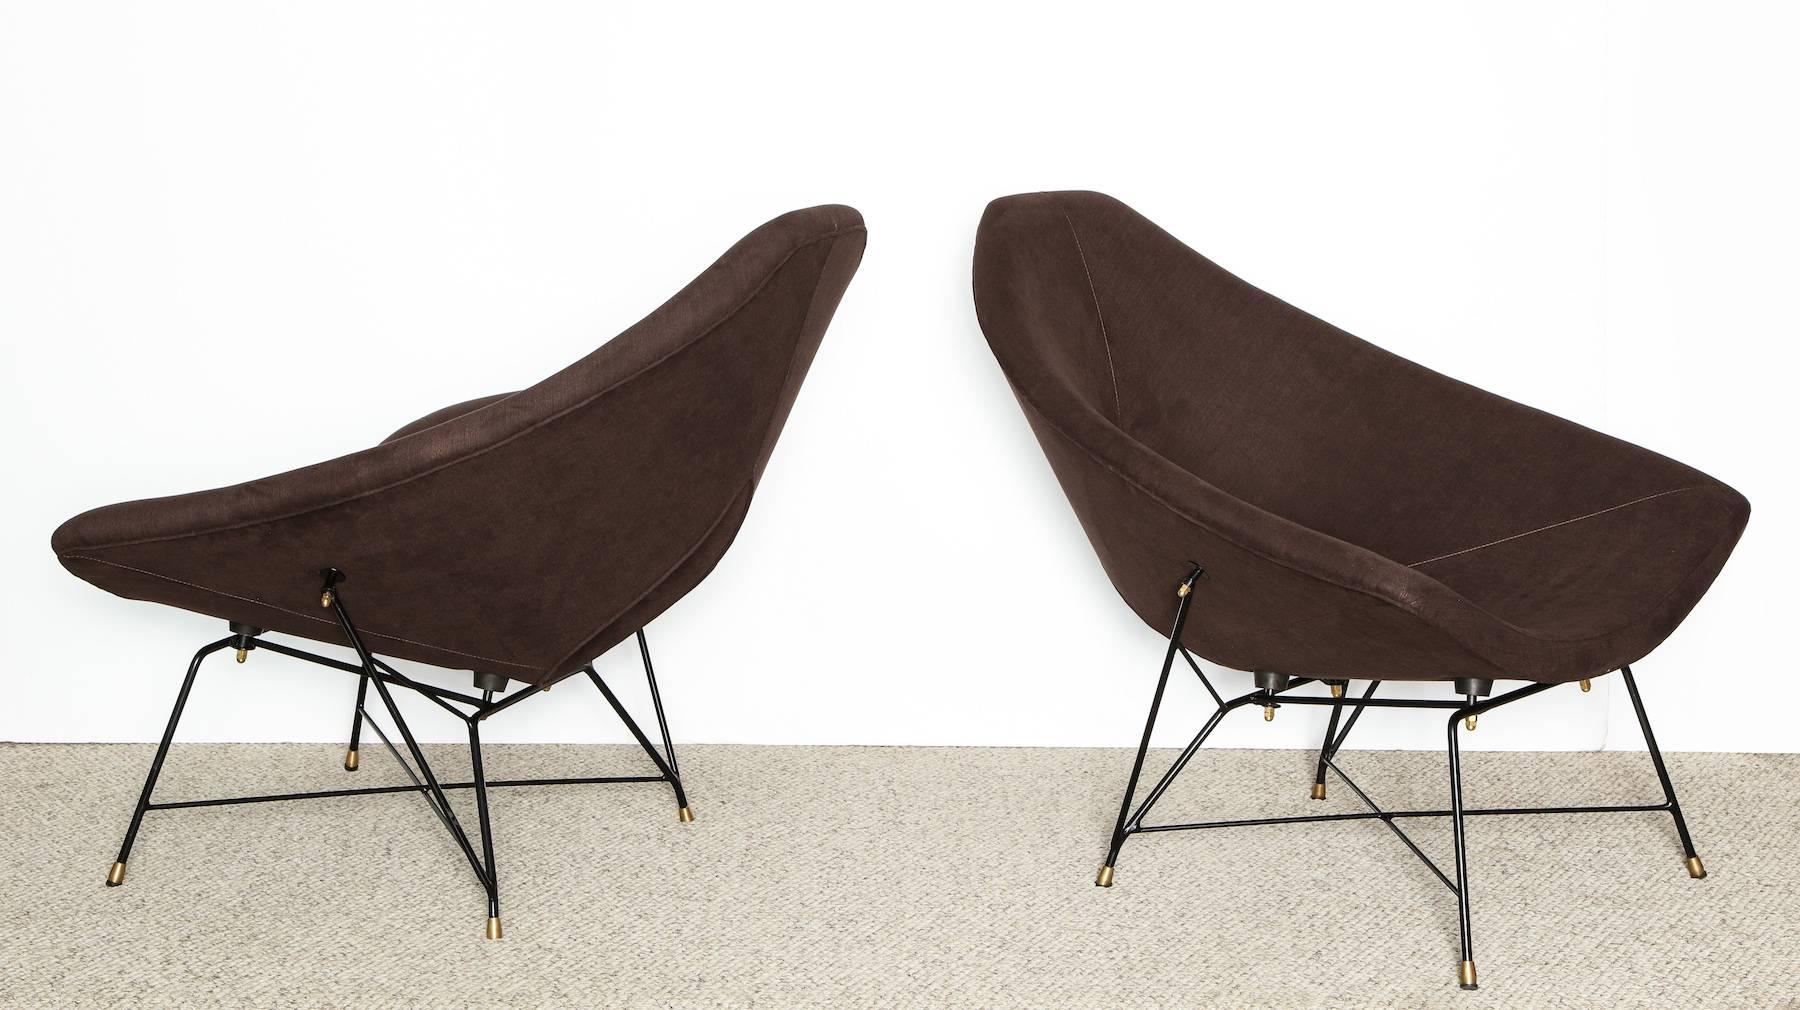 Rare pair of lounge chairs by Augusto Bozzi for Saporiti. Shaped foam over metal. Black-painted metal structure cradles the seat and adds a sculptural element to the overall design. This rare model is part of a series of chairs designed by Bozzi in